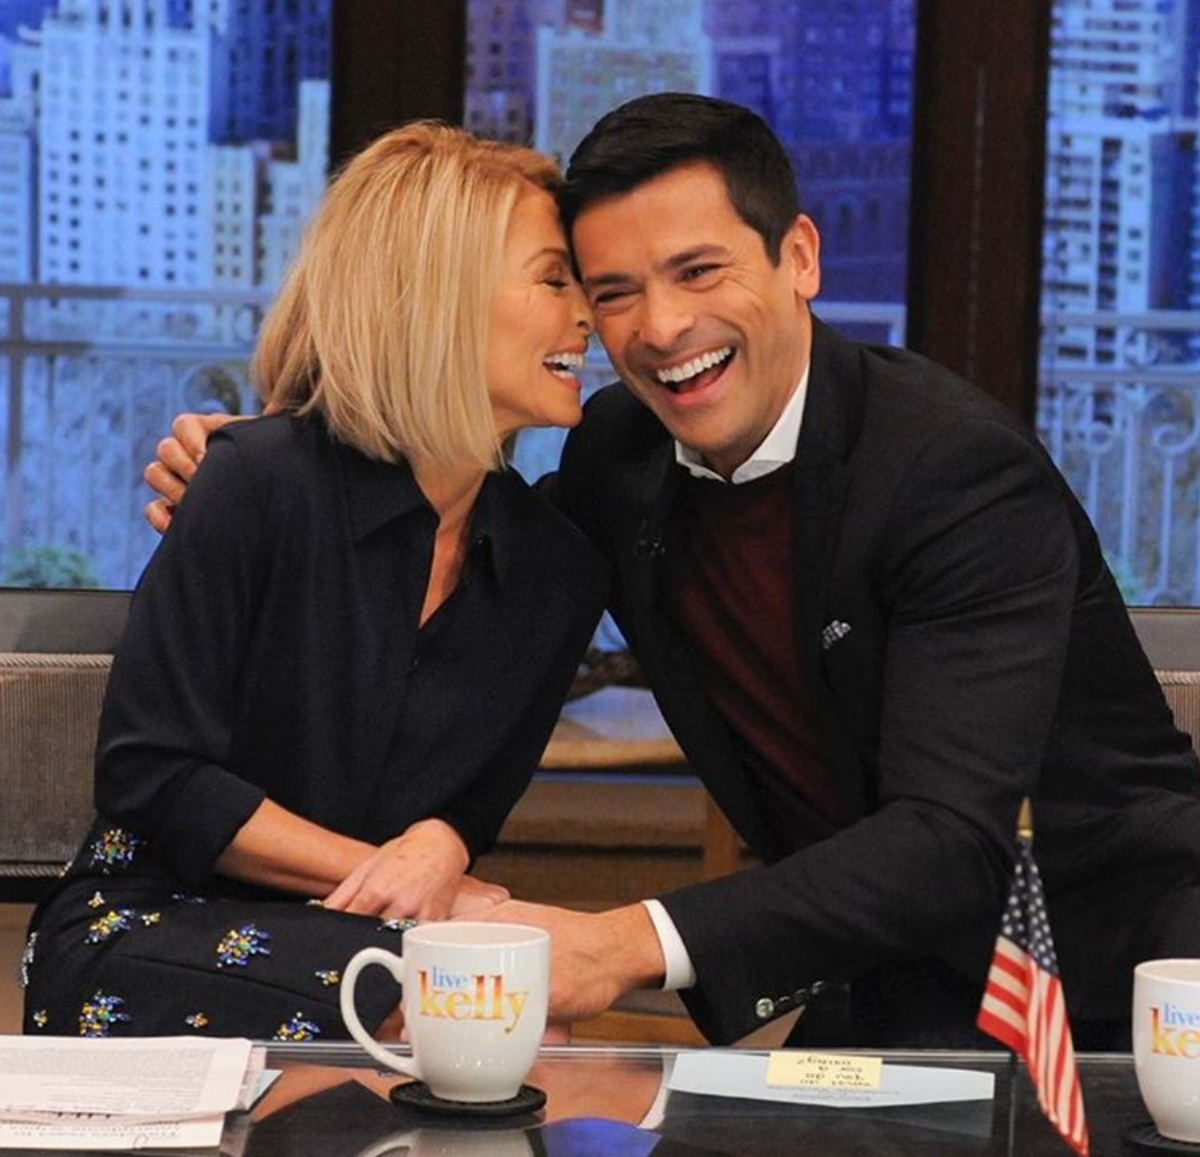 8 Things I'd Tell Kelly Ripa If We Got Coffee Together